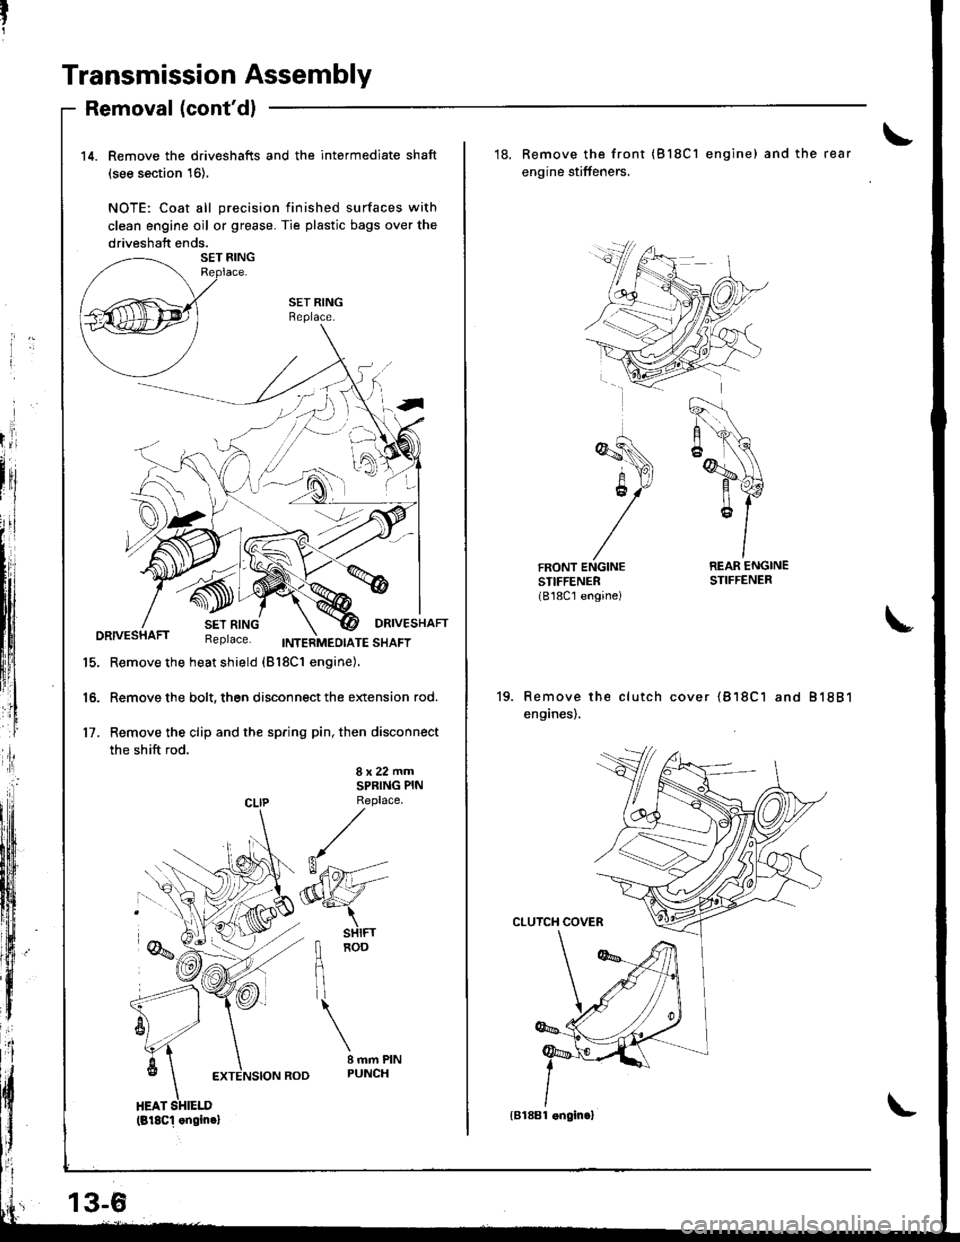 HONDA INTEGRA 1998 4.G Service Manual Transmission Assembly
Removal (contdl
14. Remove the driveshafts and the intermediate shaft
(see section 16).
NOTE: Coat all precision finished surfaces with
clean engine oil or grease. Tie plastic b